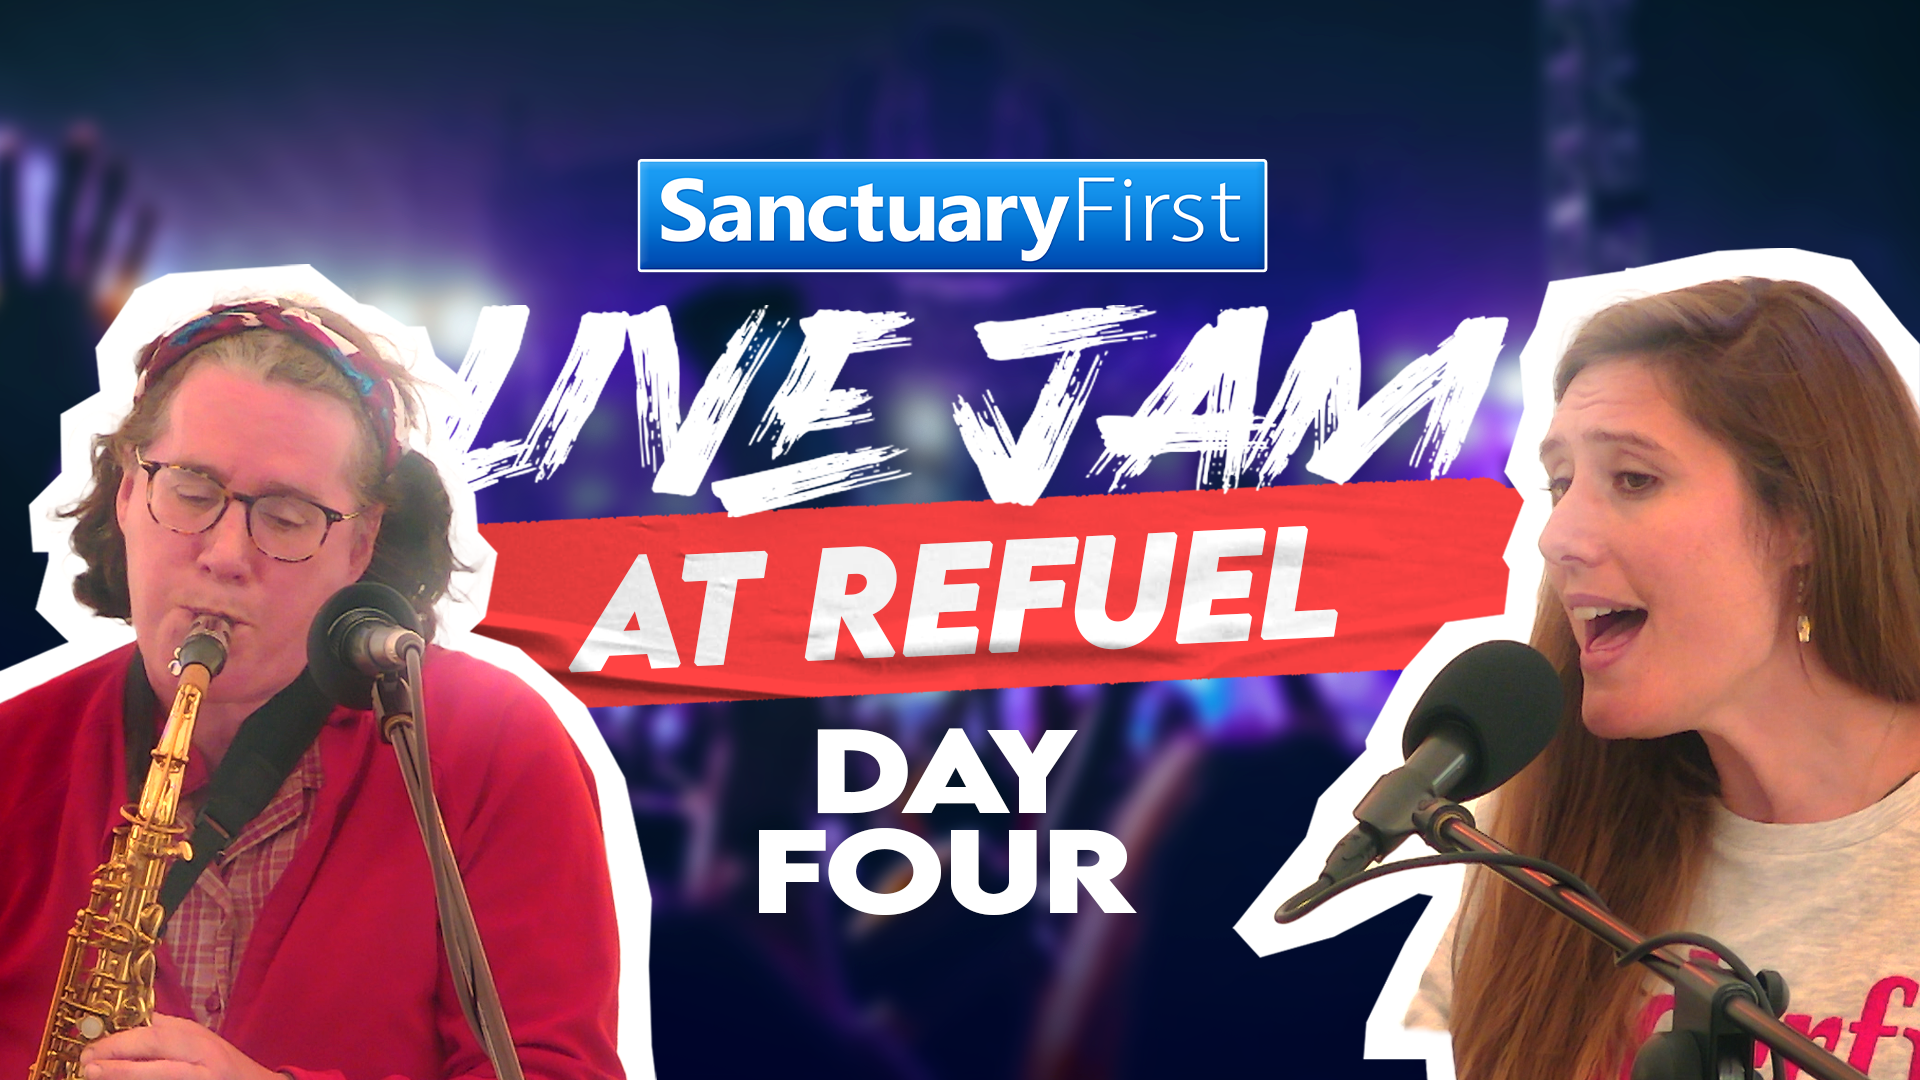 Live Jam at Refuel - Day Four